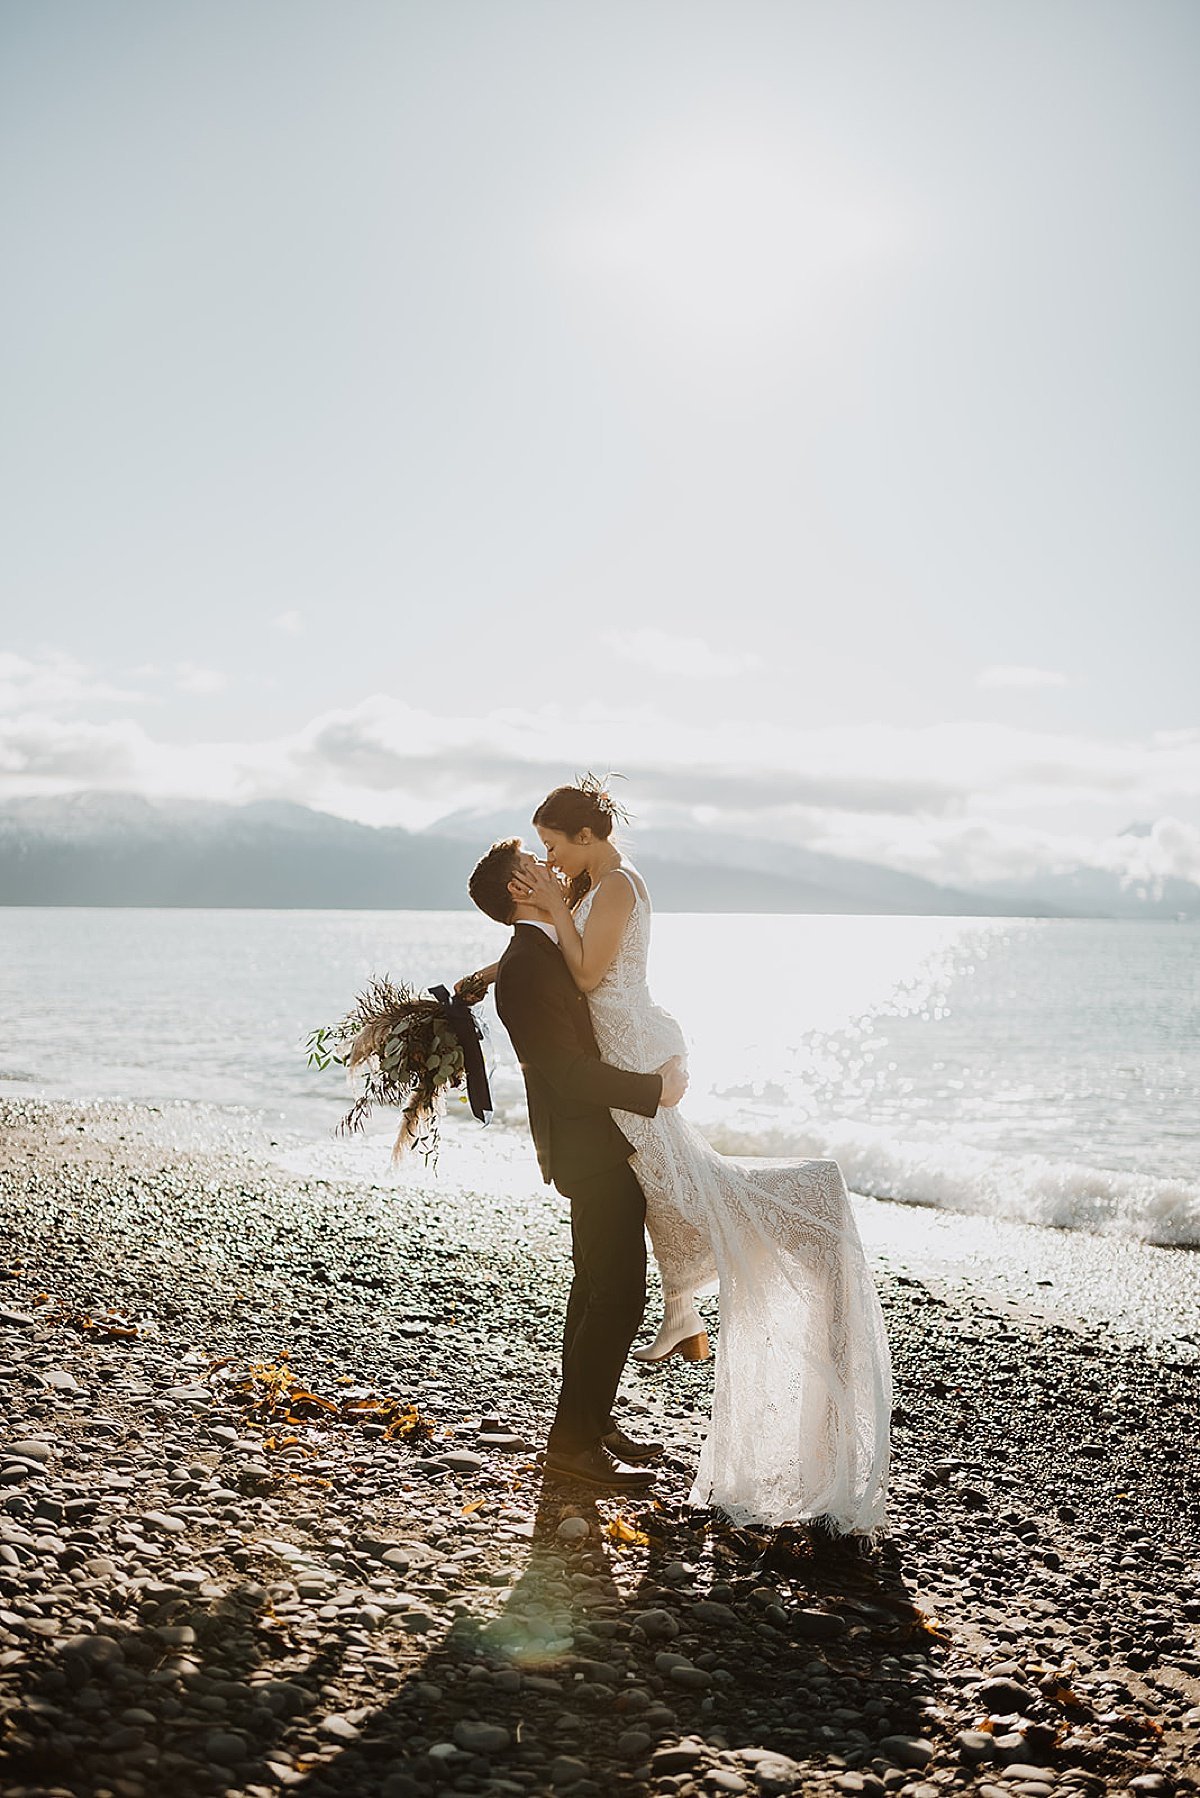  bride and groom pose with a kiss on mountain lake beach at ceremony shot by alaska wedding photographer 